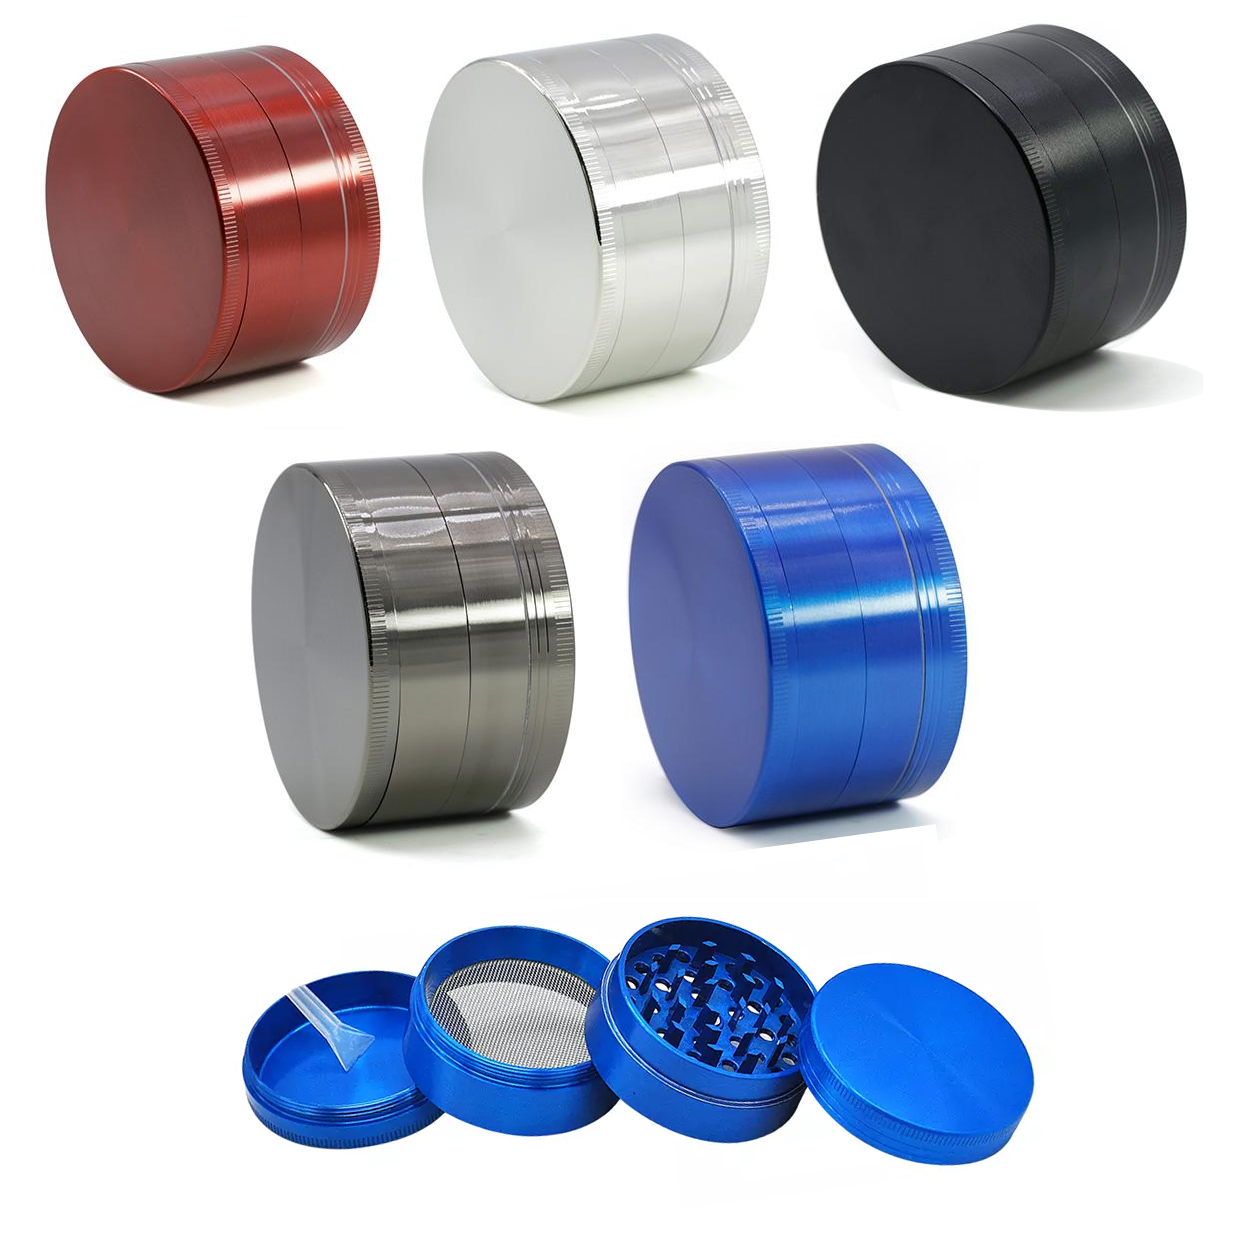 Aluminum 4-Piece Grinder 52mm x 34mm Dry Herb Accessories Vancouver Toronto Calgary Richmond Montreal Kingsway Winnipeg Quebec Coquitlam Canada Canadian Vapes Shop Free Shipping E-Juice Mods Nic Salt